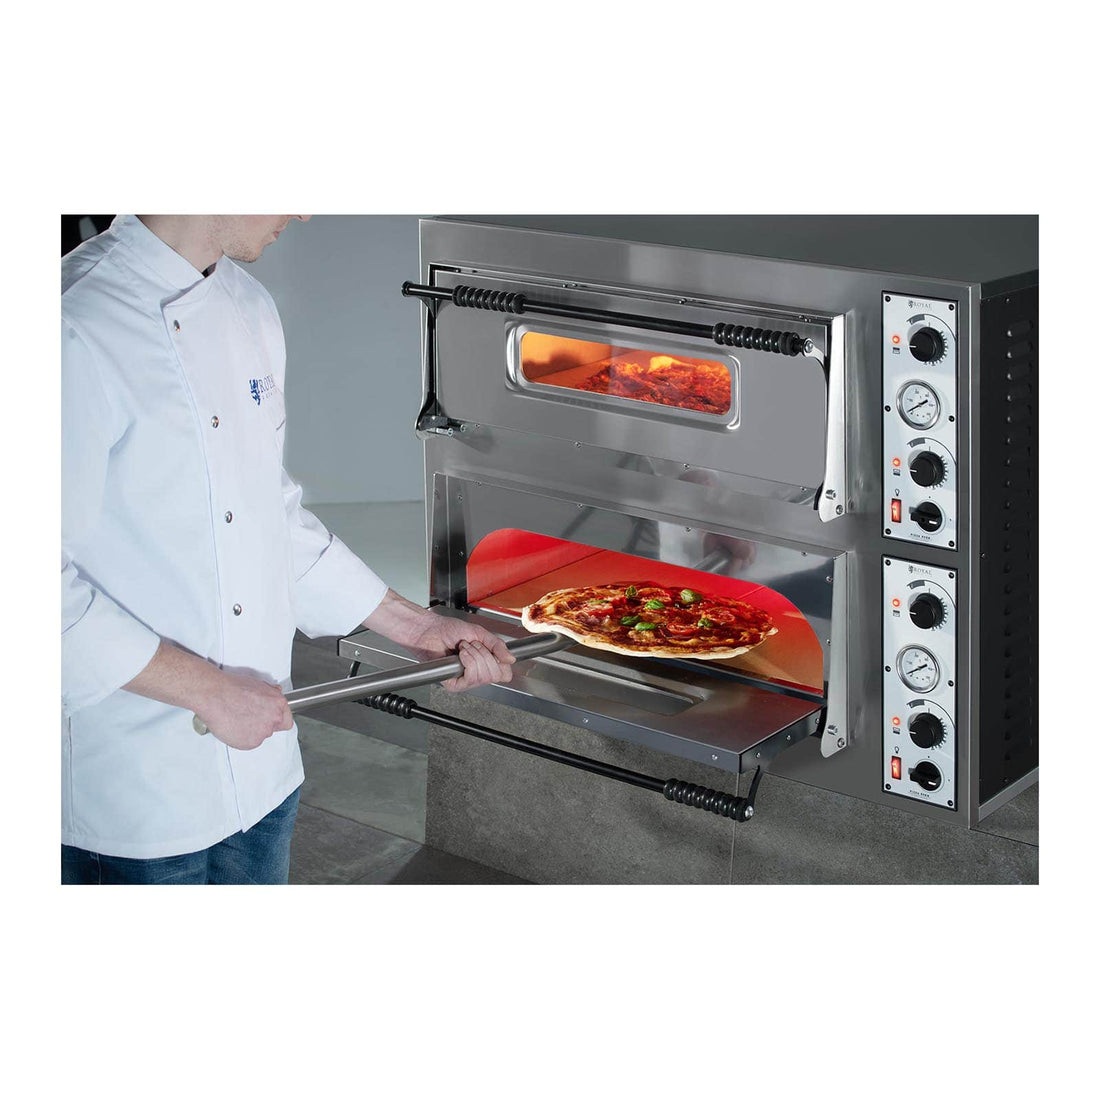 Pizza Ovens now back in stock!